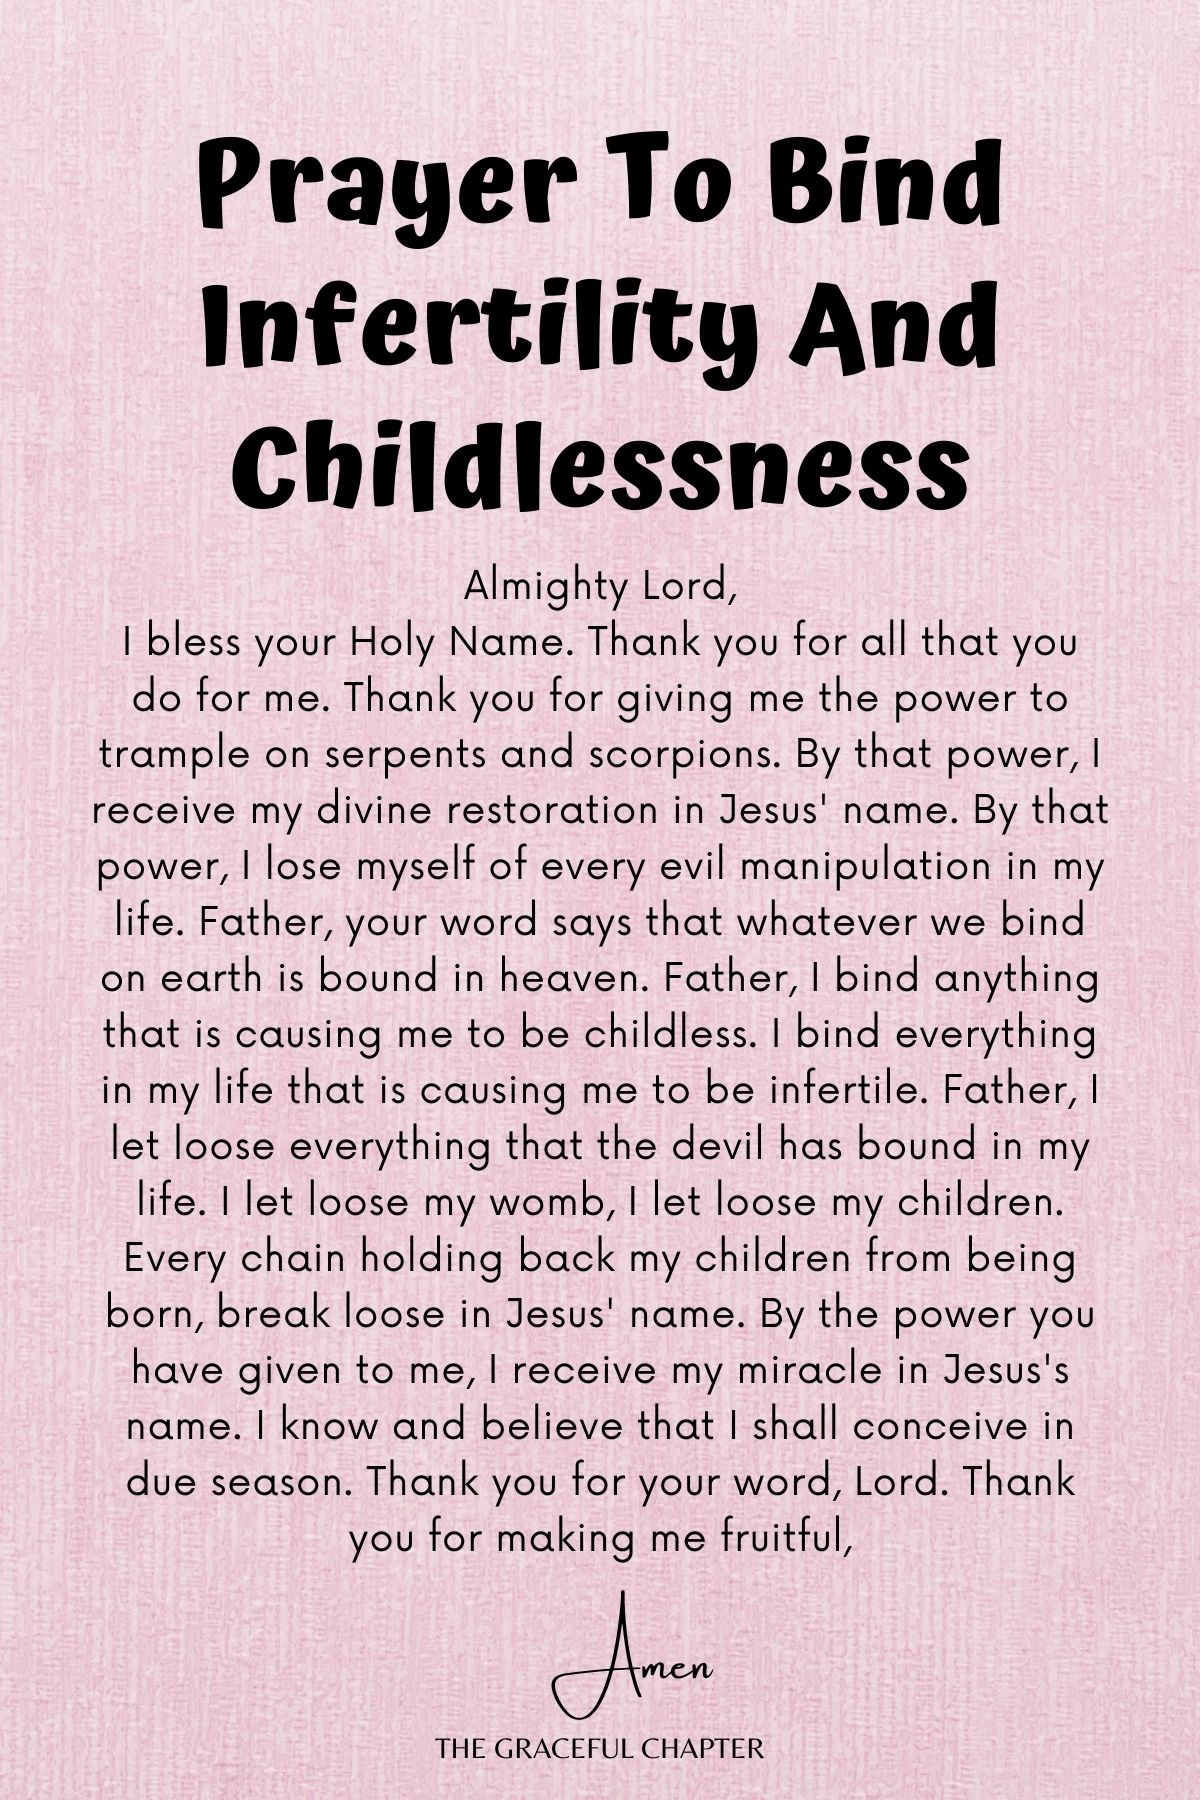 I bind infertility and childlessness